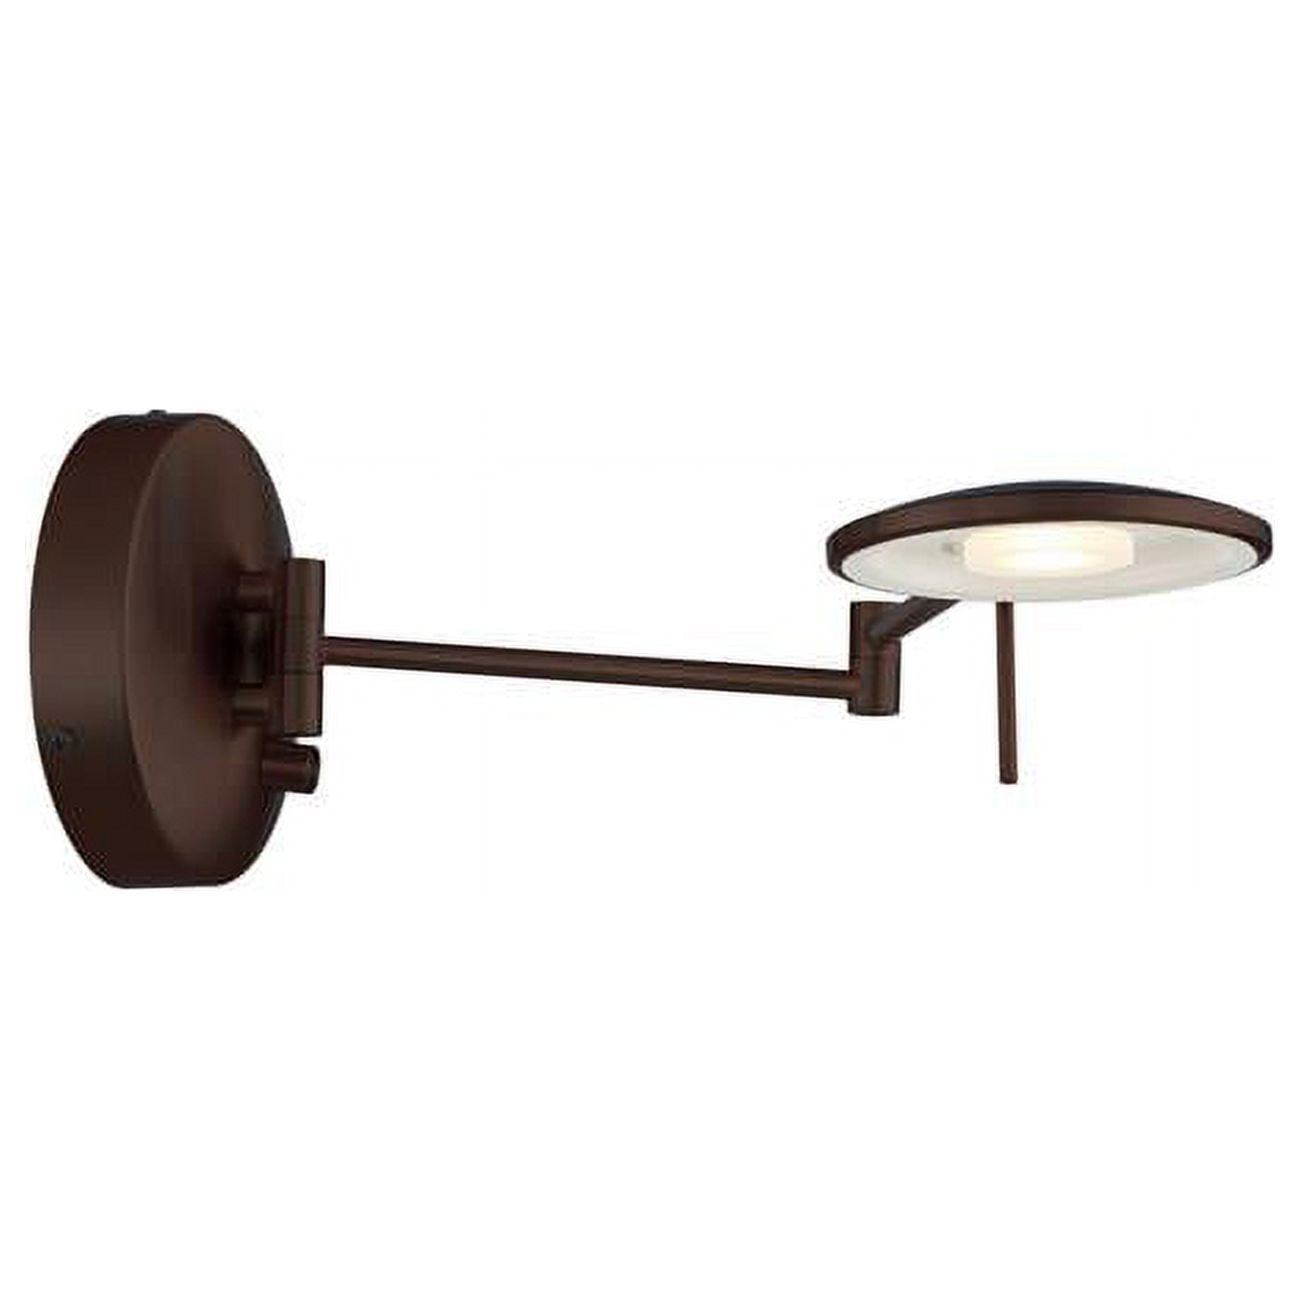 Picture of Arnsberg 225870128 Dessau Turbo Wall Sconce, Bronze